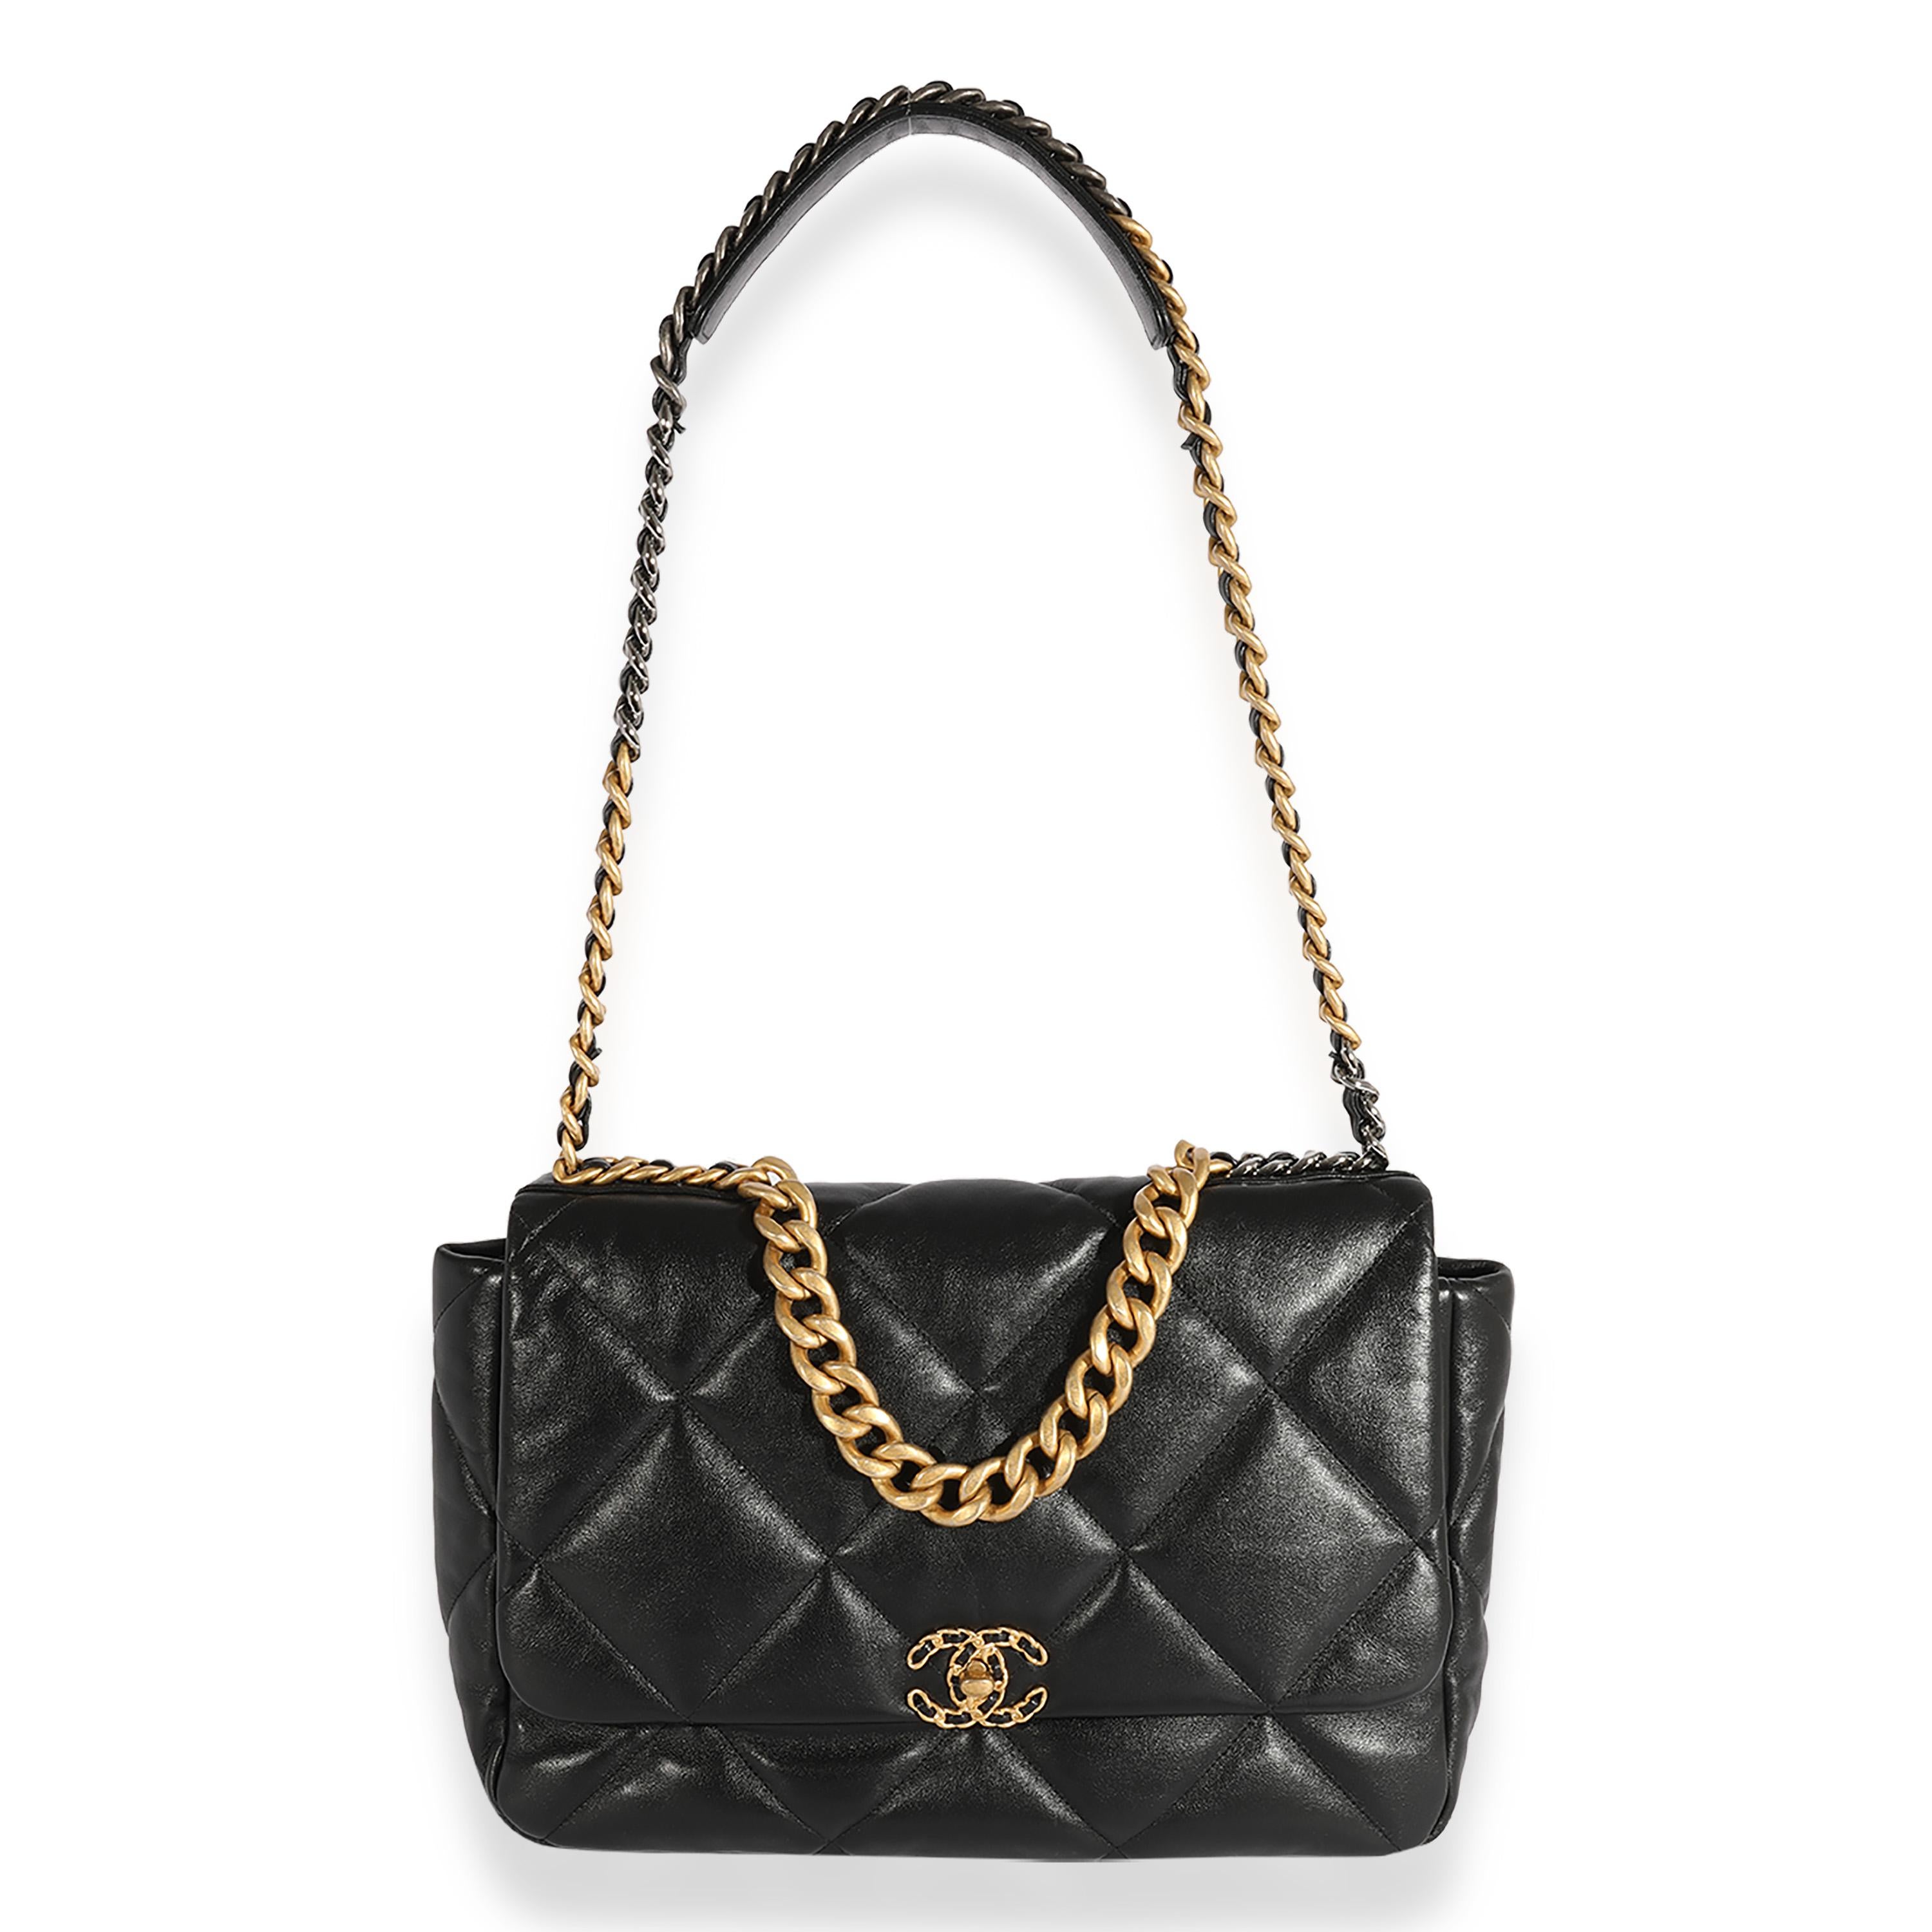 Listing Title: Chanel Black Quilted Lambskin Large Chanel 19 Flap Bag
SKU: 123640
Condition: Pre-owned 
Handbag Condition: Very Good
Condition Comments: Very Good Condition. Scuffing to corners and faintly throughout lambskin. Scuffing to interior